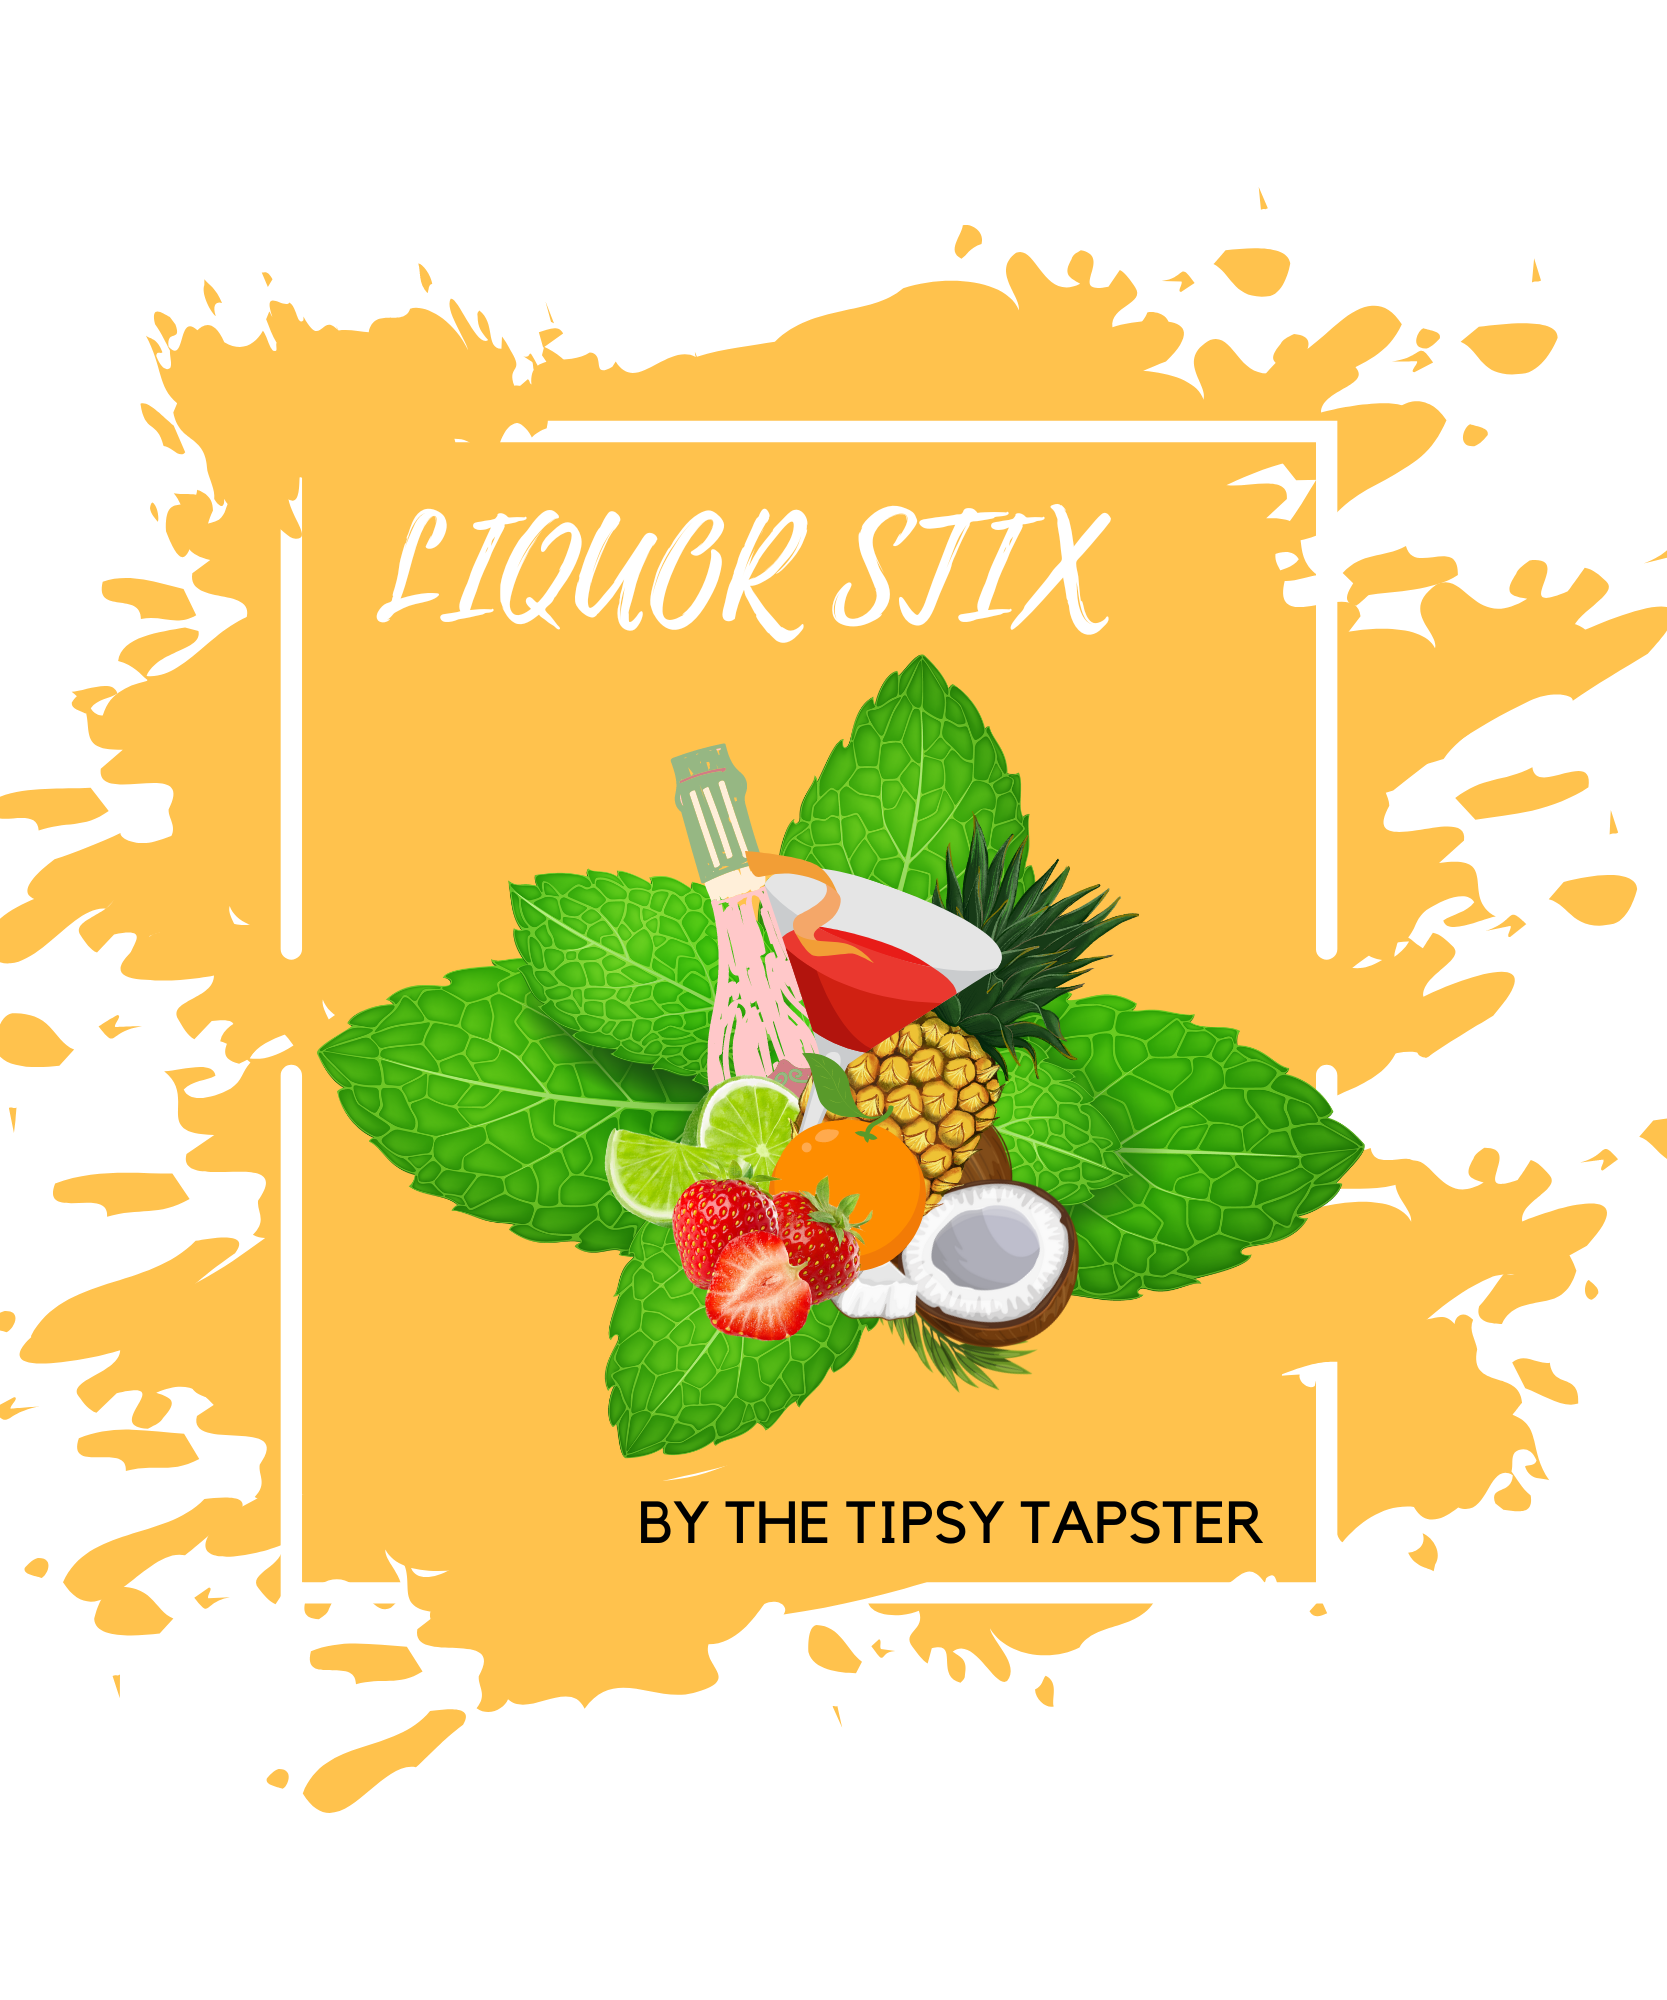 LIQUOR STIX by The Tipsy Tapster